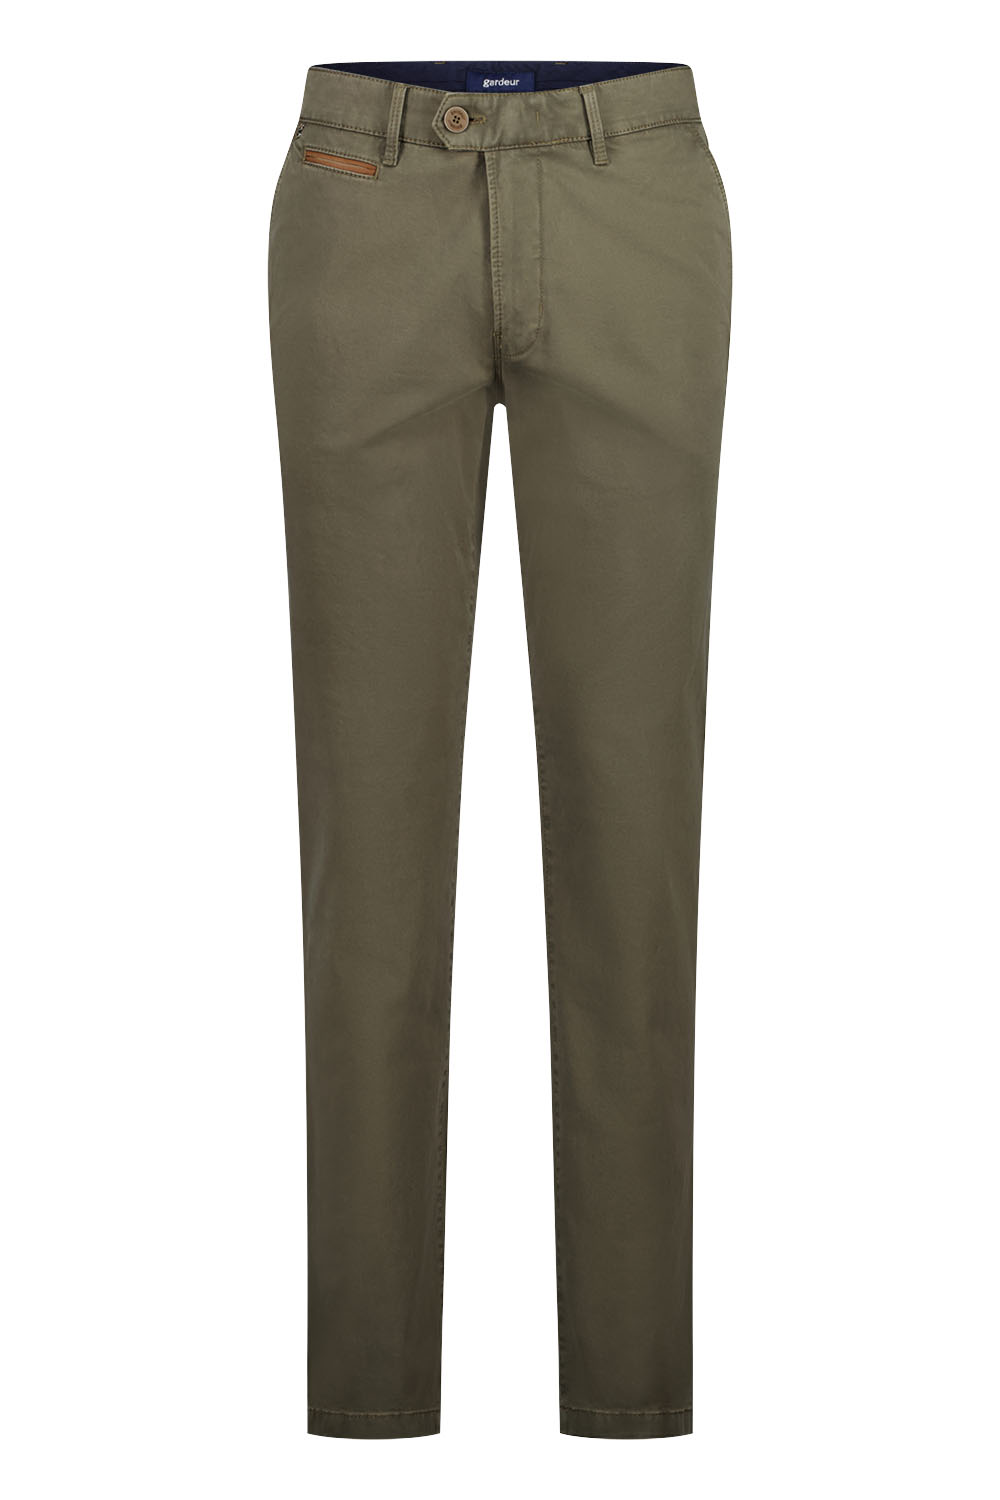 Gardeur Benny-3 Flatfront Modern Fit Chino Dusty Olive